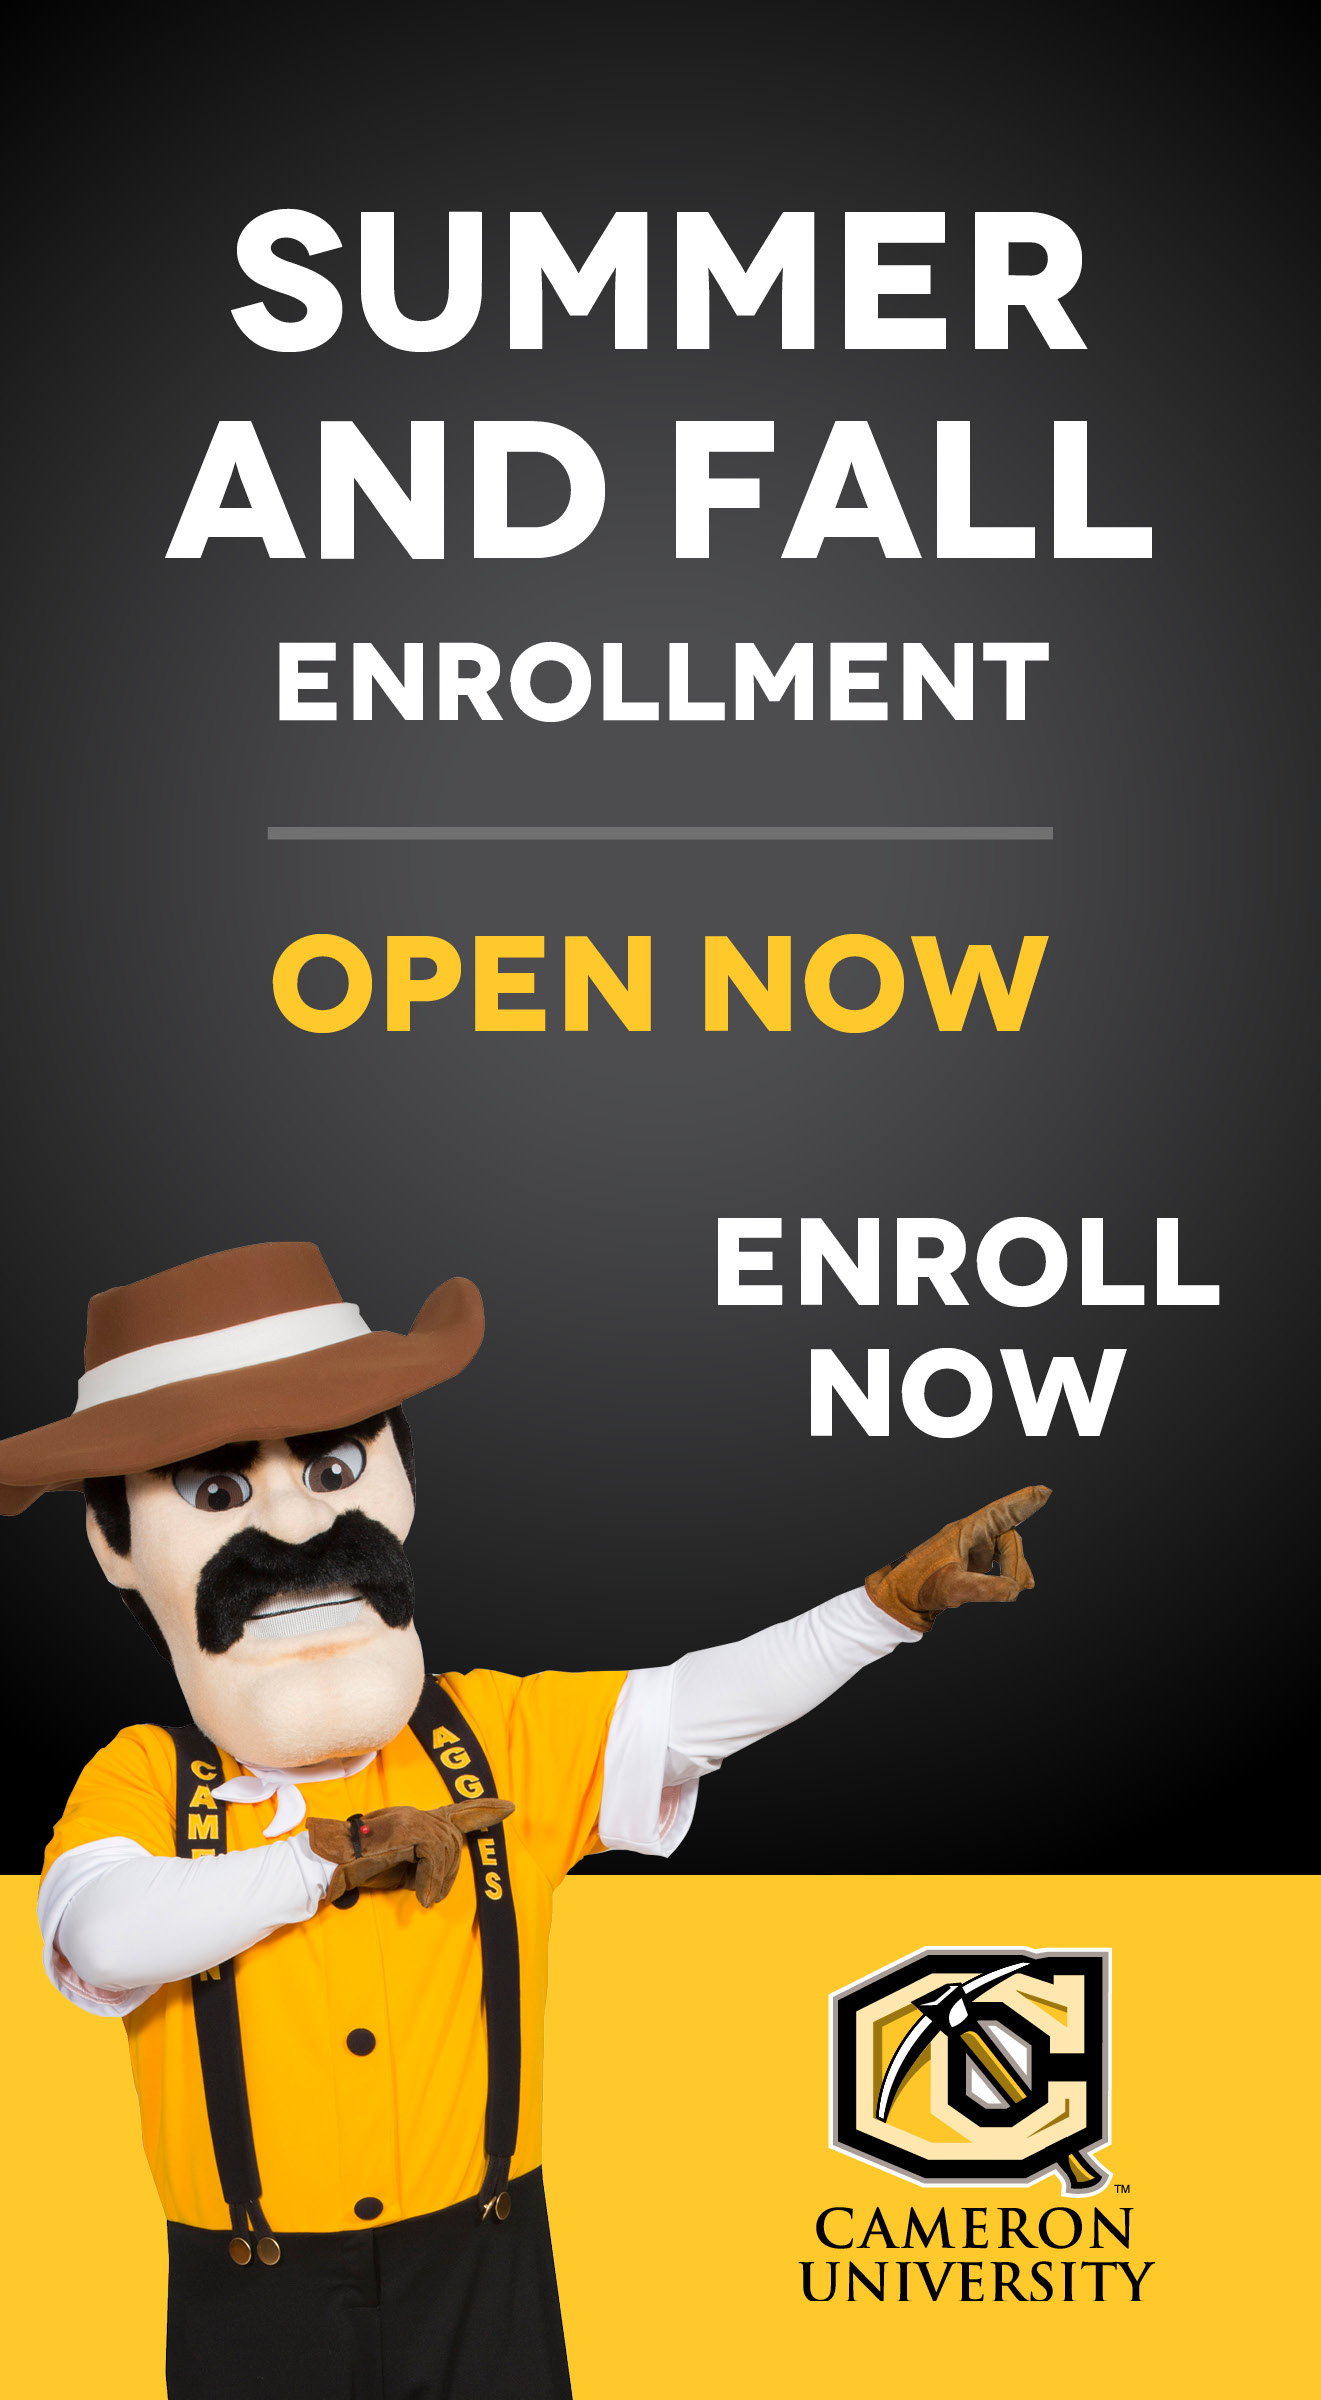 Summer and Fall Enrollment Open Now.
Enroll Now.